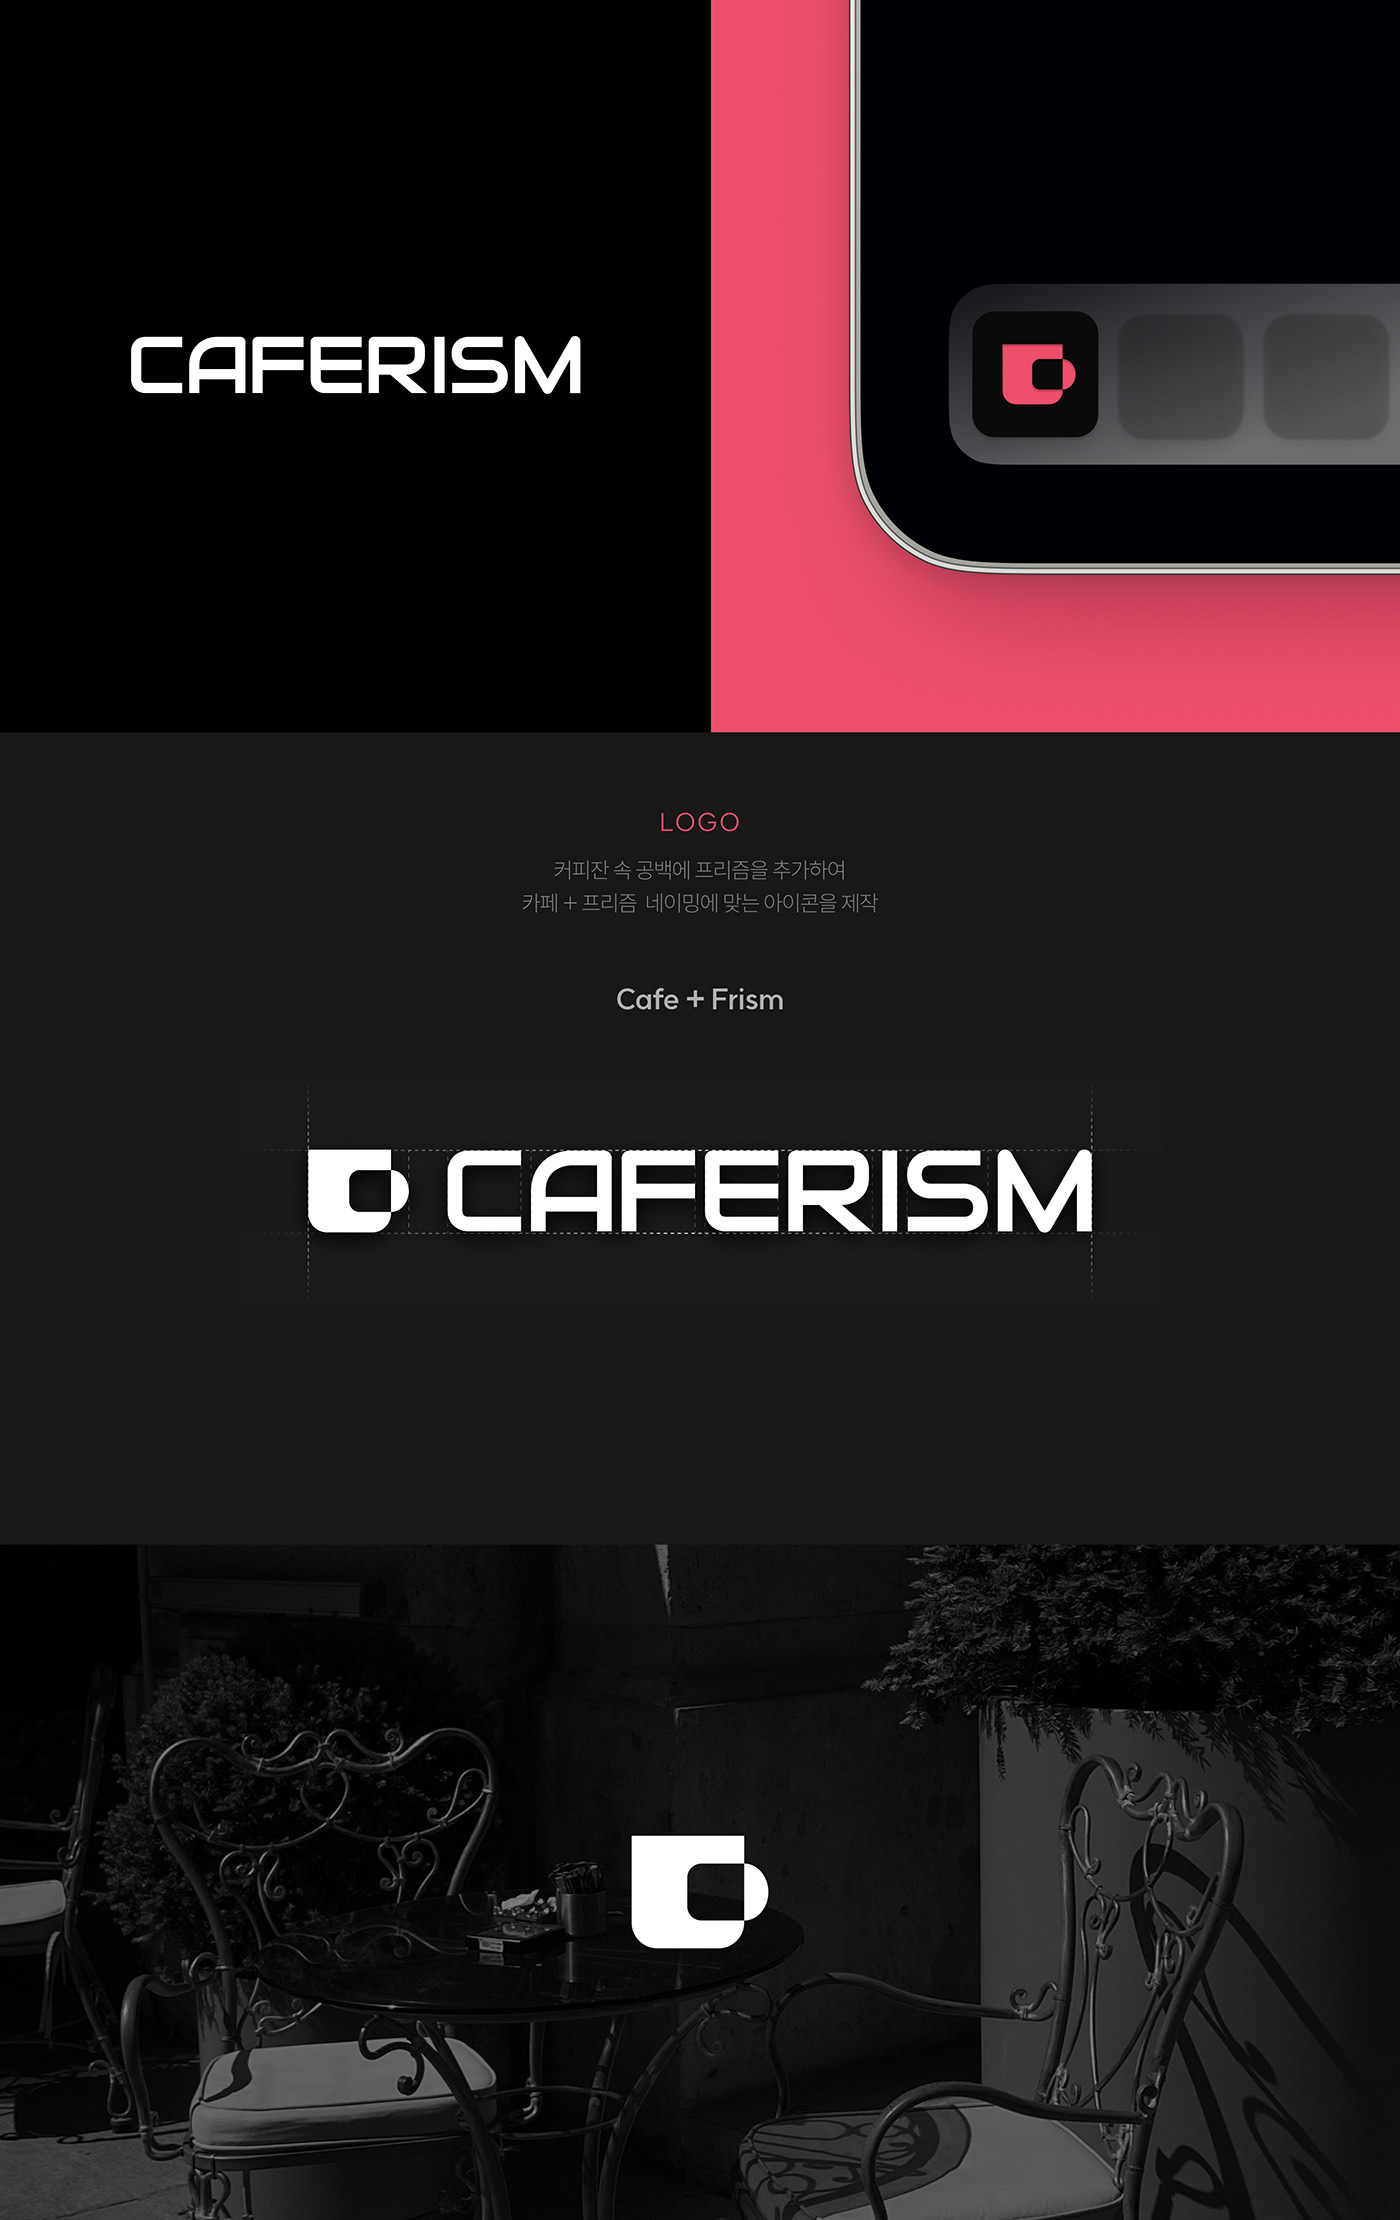 UI/UX #cafe  Mobile app Figma #10TH LAB VOID EXHIBITION #ar #AR Information #CAFERISM #pink #Search Service